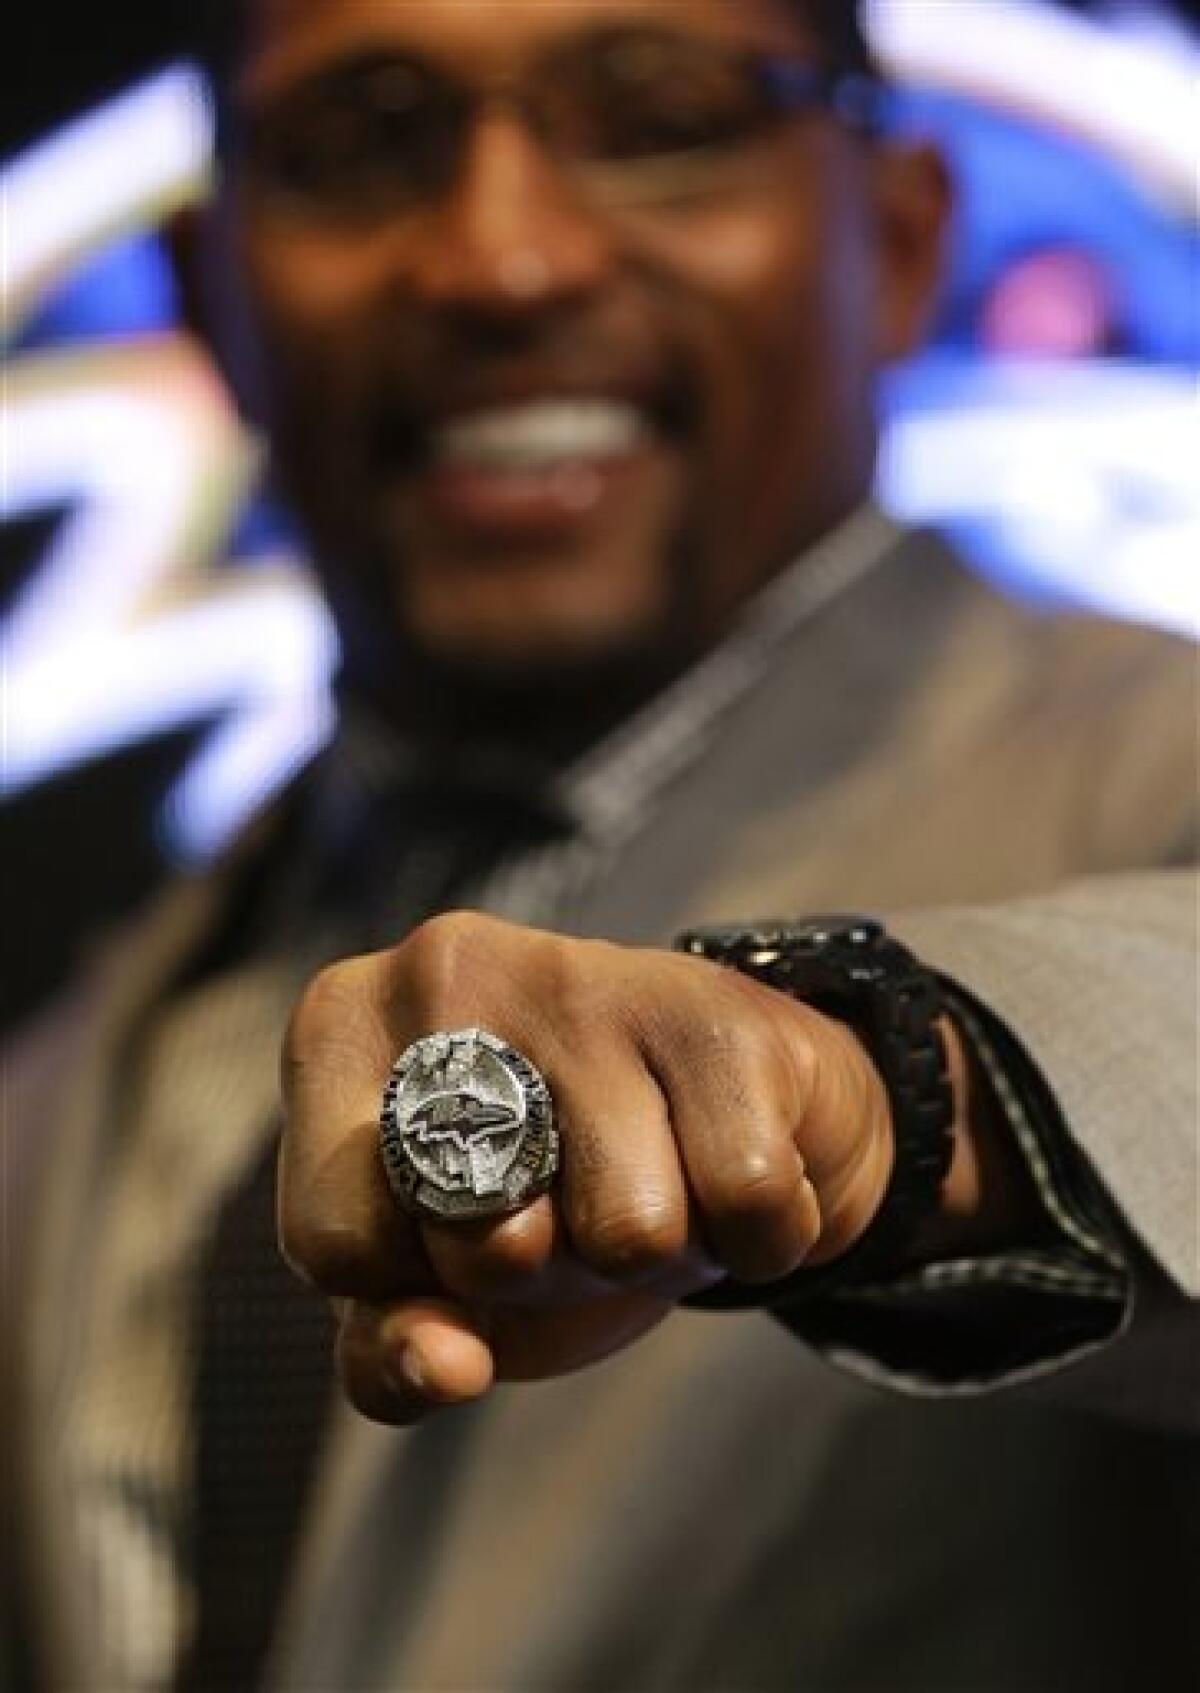 The Super Bowl Rings